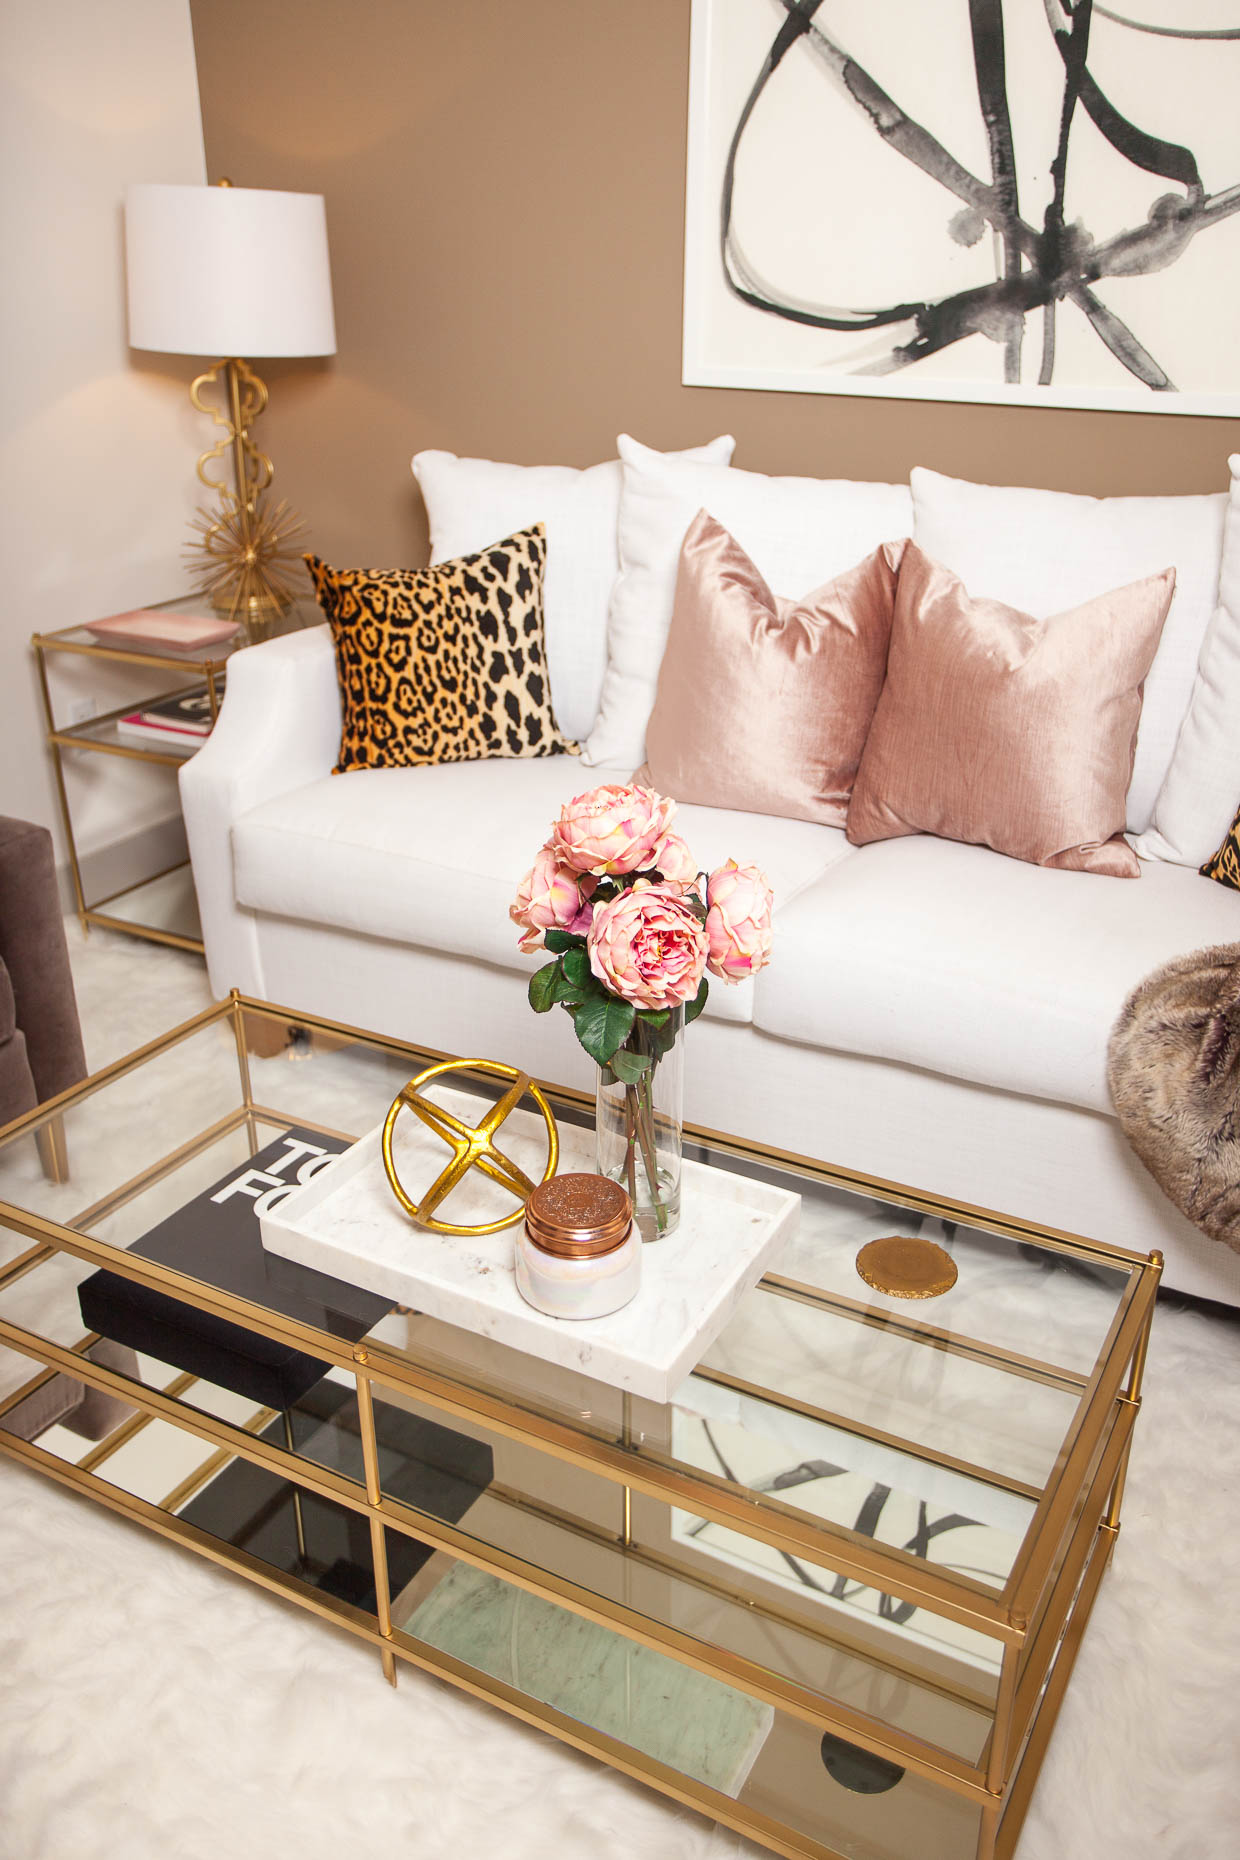 The Edit | At Home: Styling with Animal Print